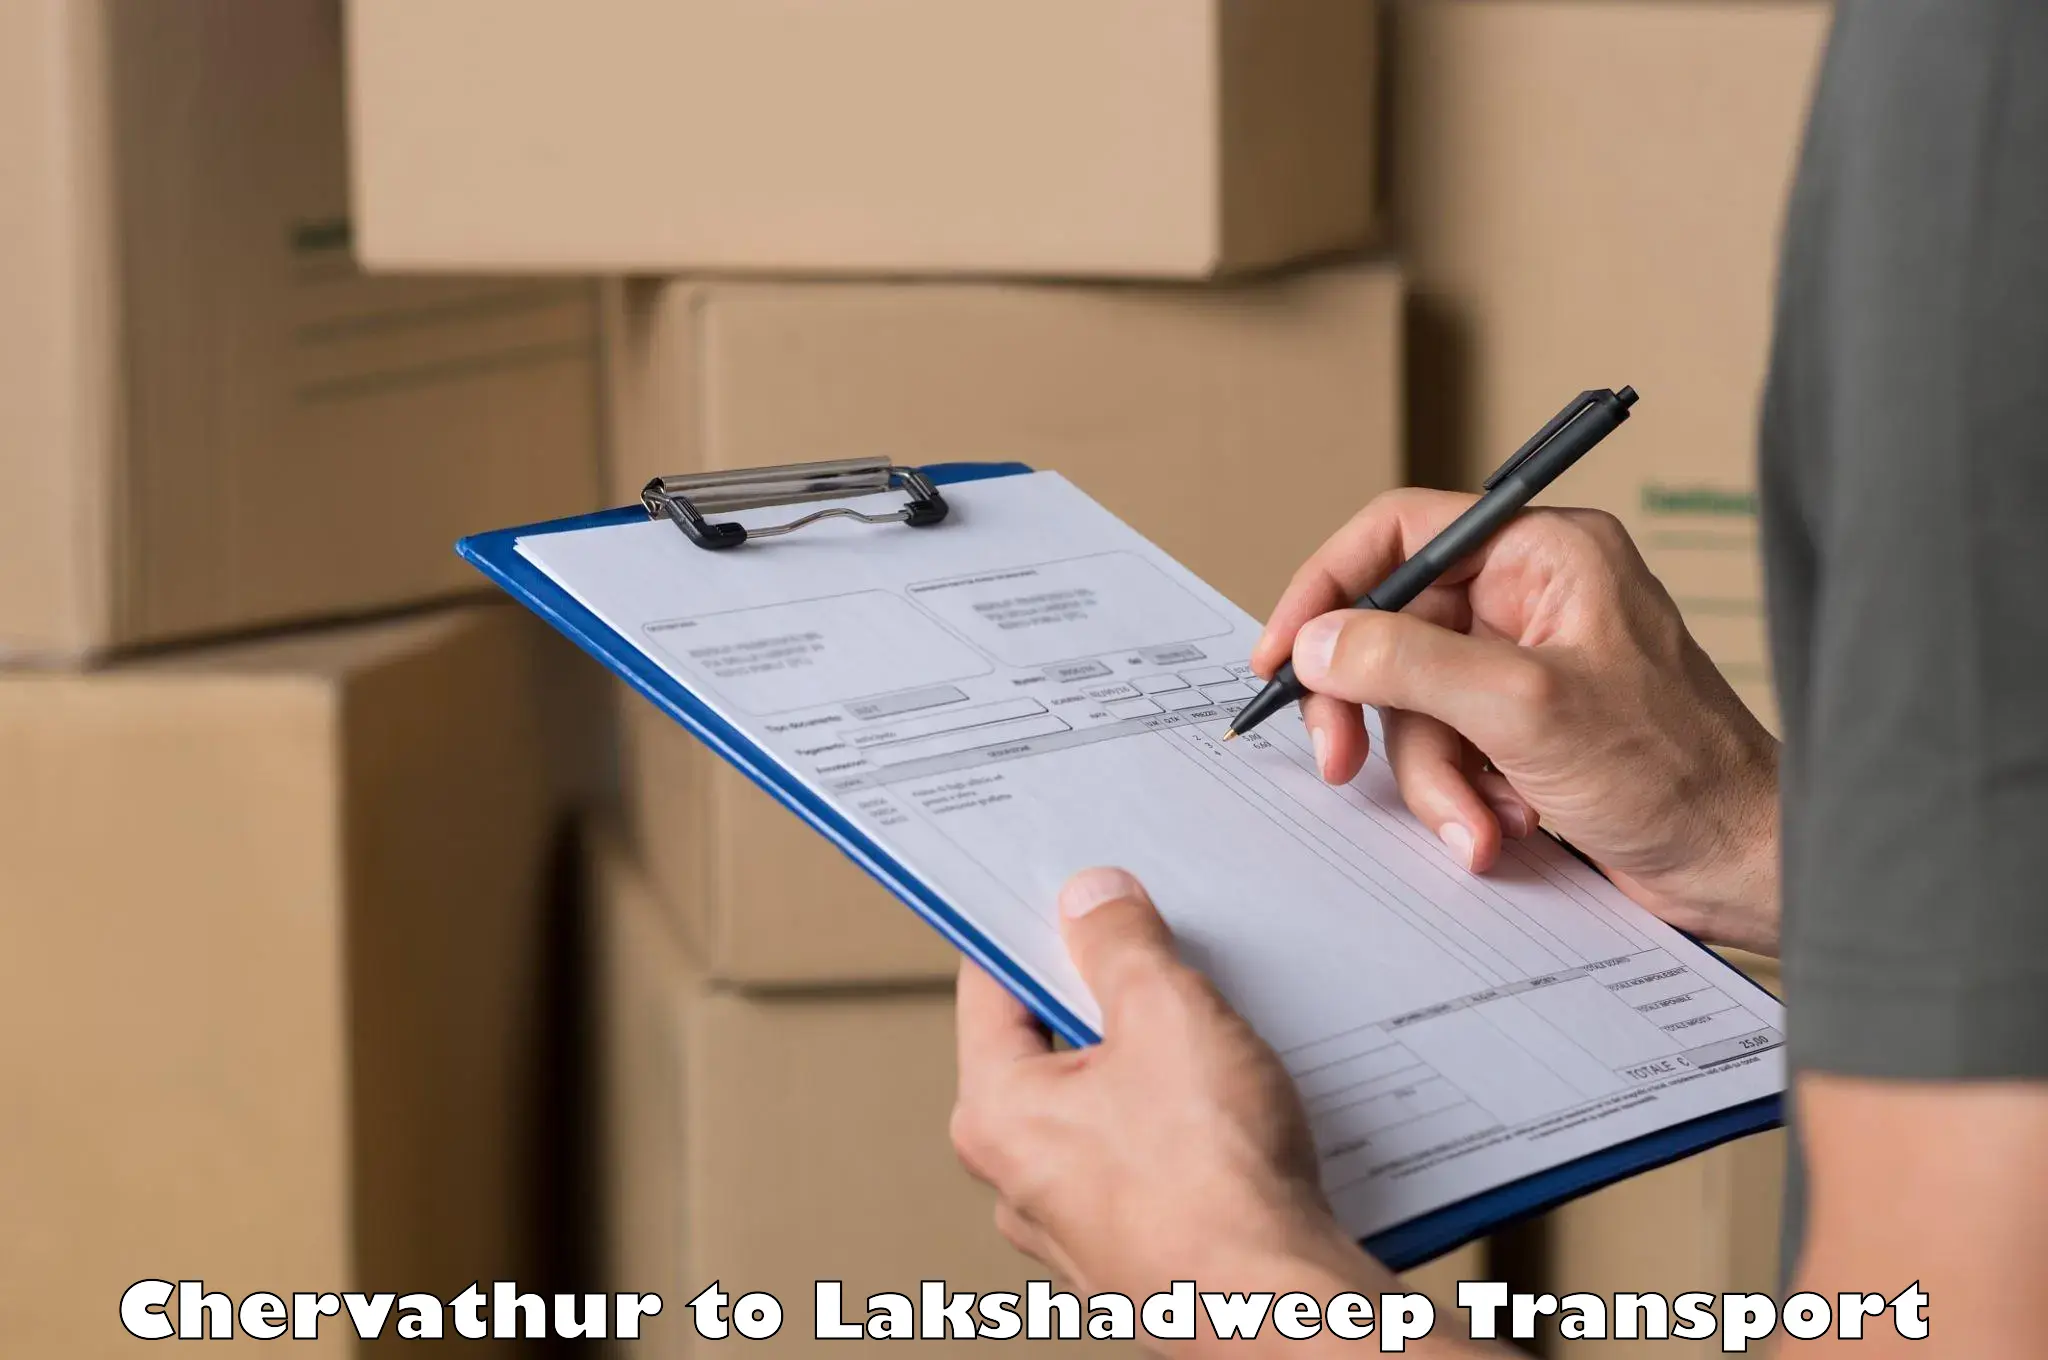 Package delivery services Chervathur to Lakshadweep